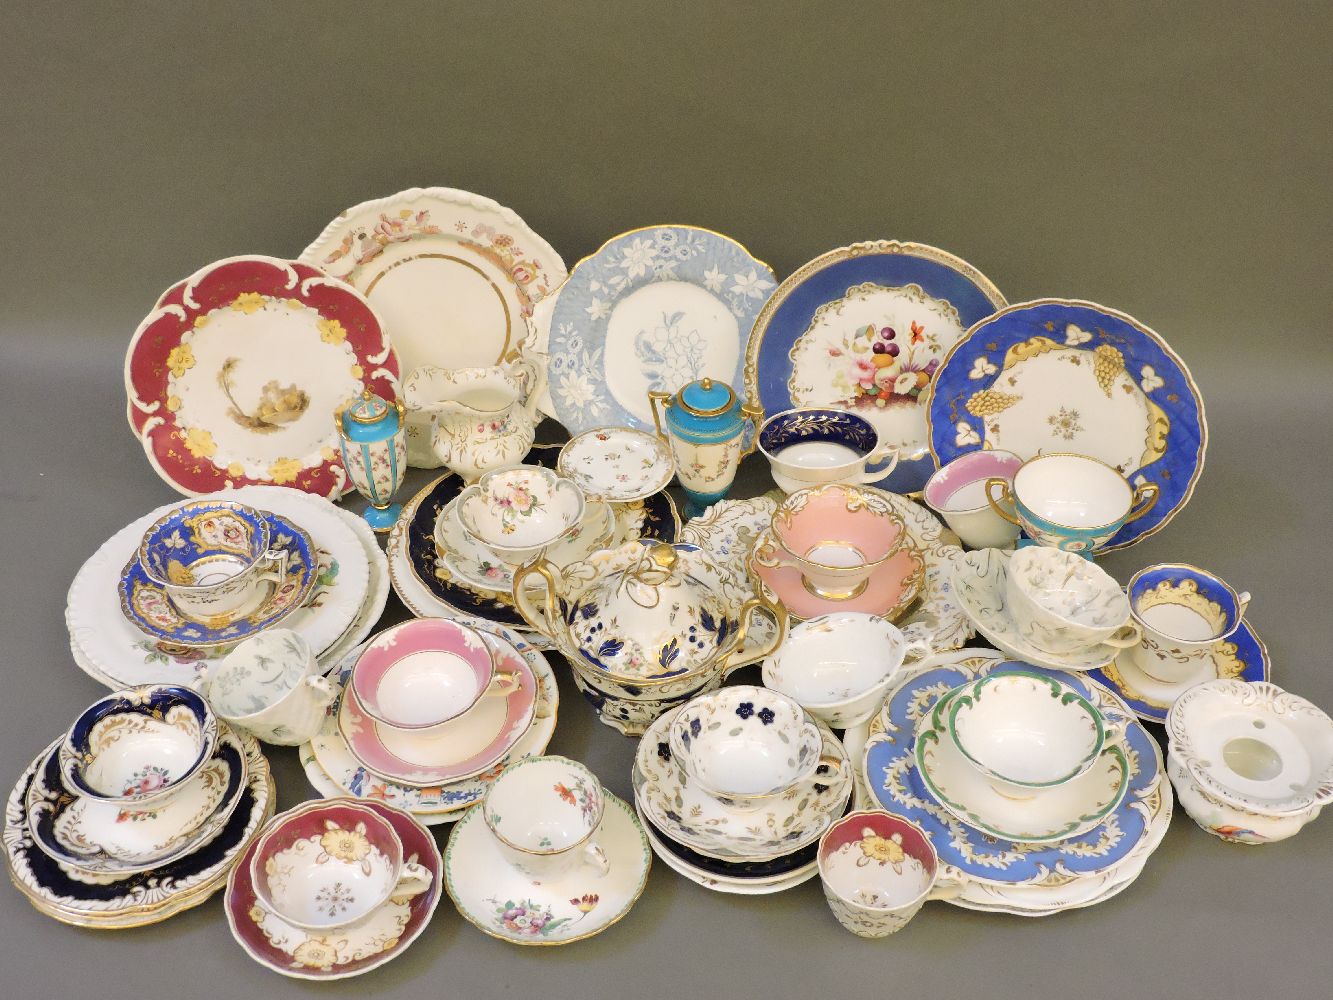 A collection of Rockingham, including plates, dishes, cups and saucers, most items with puce mark,